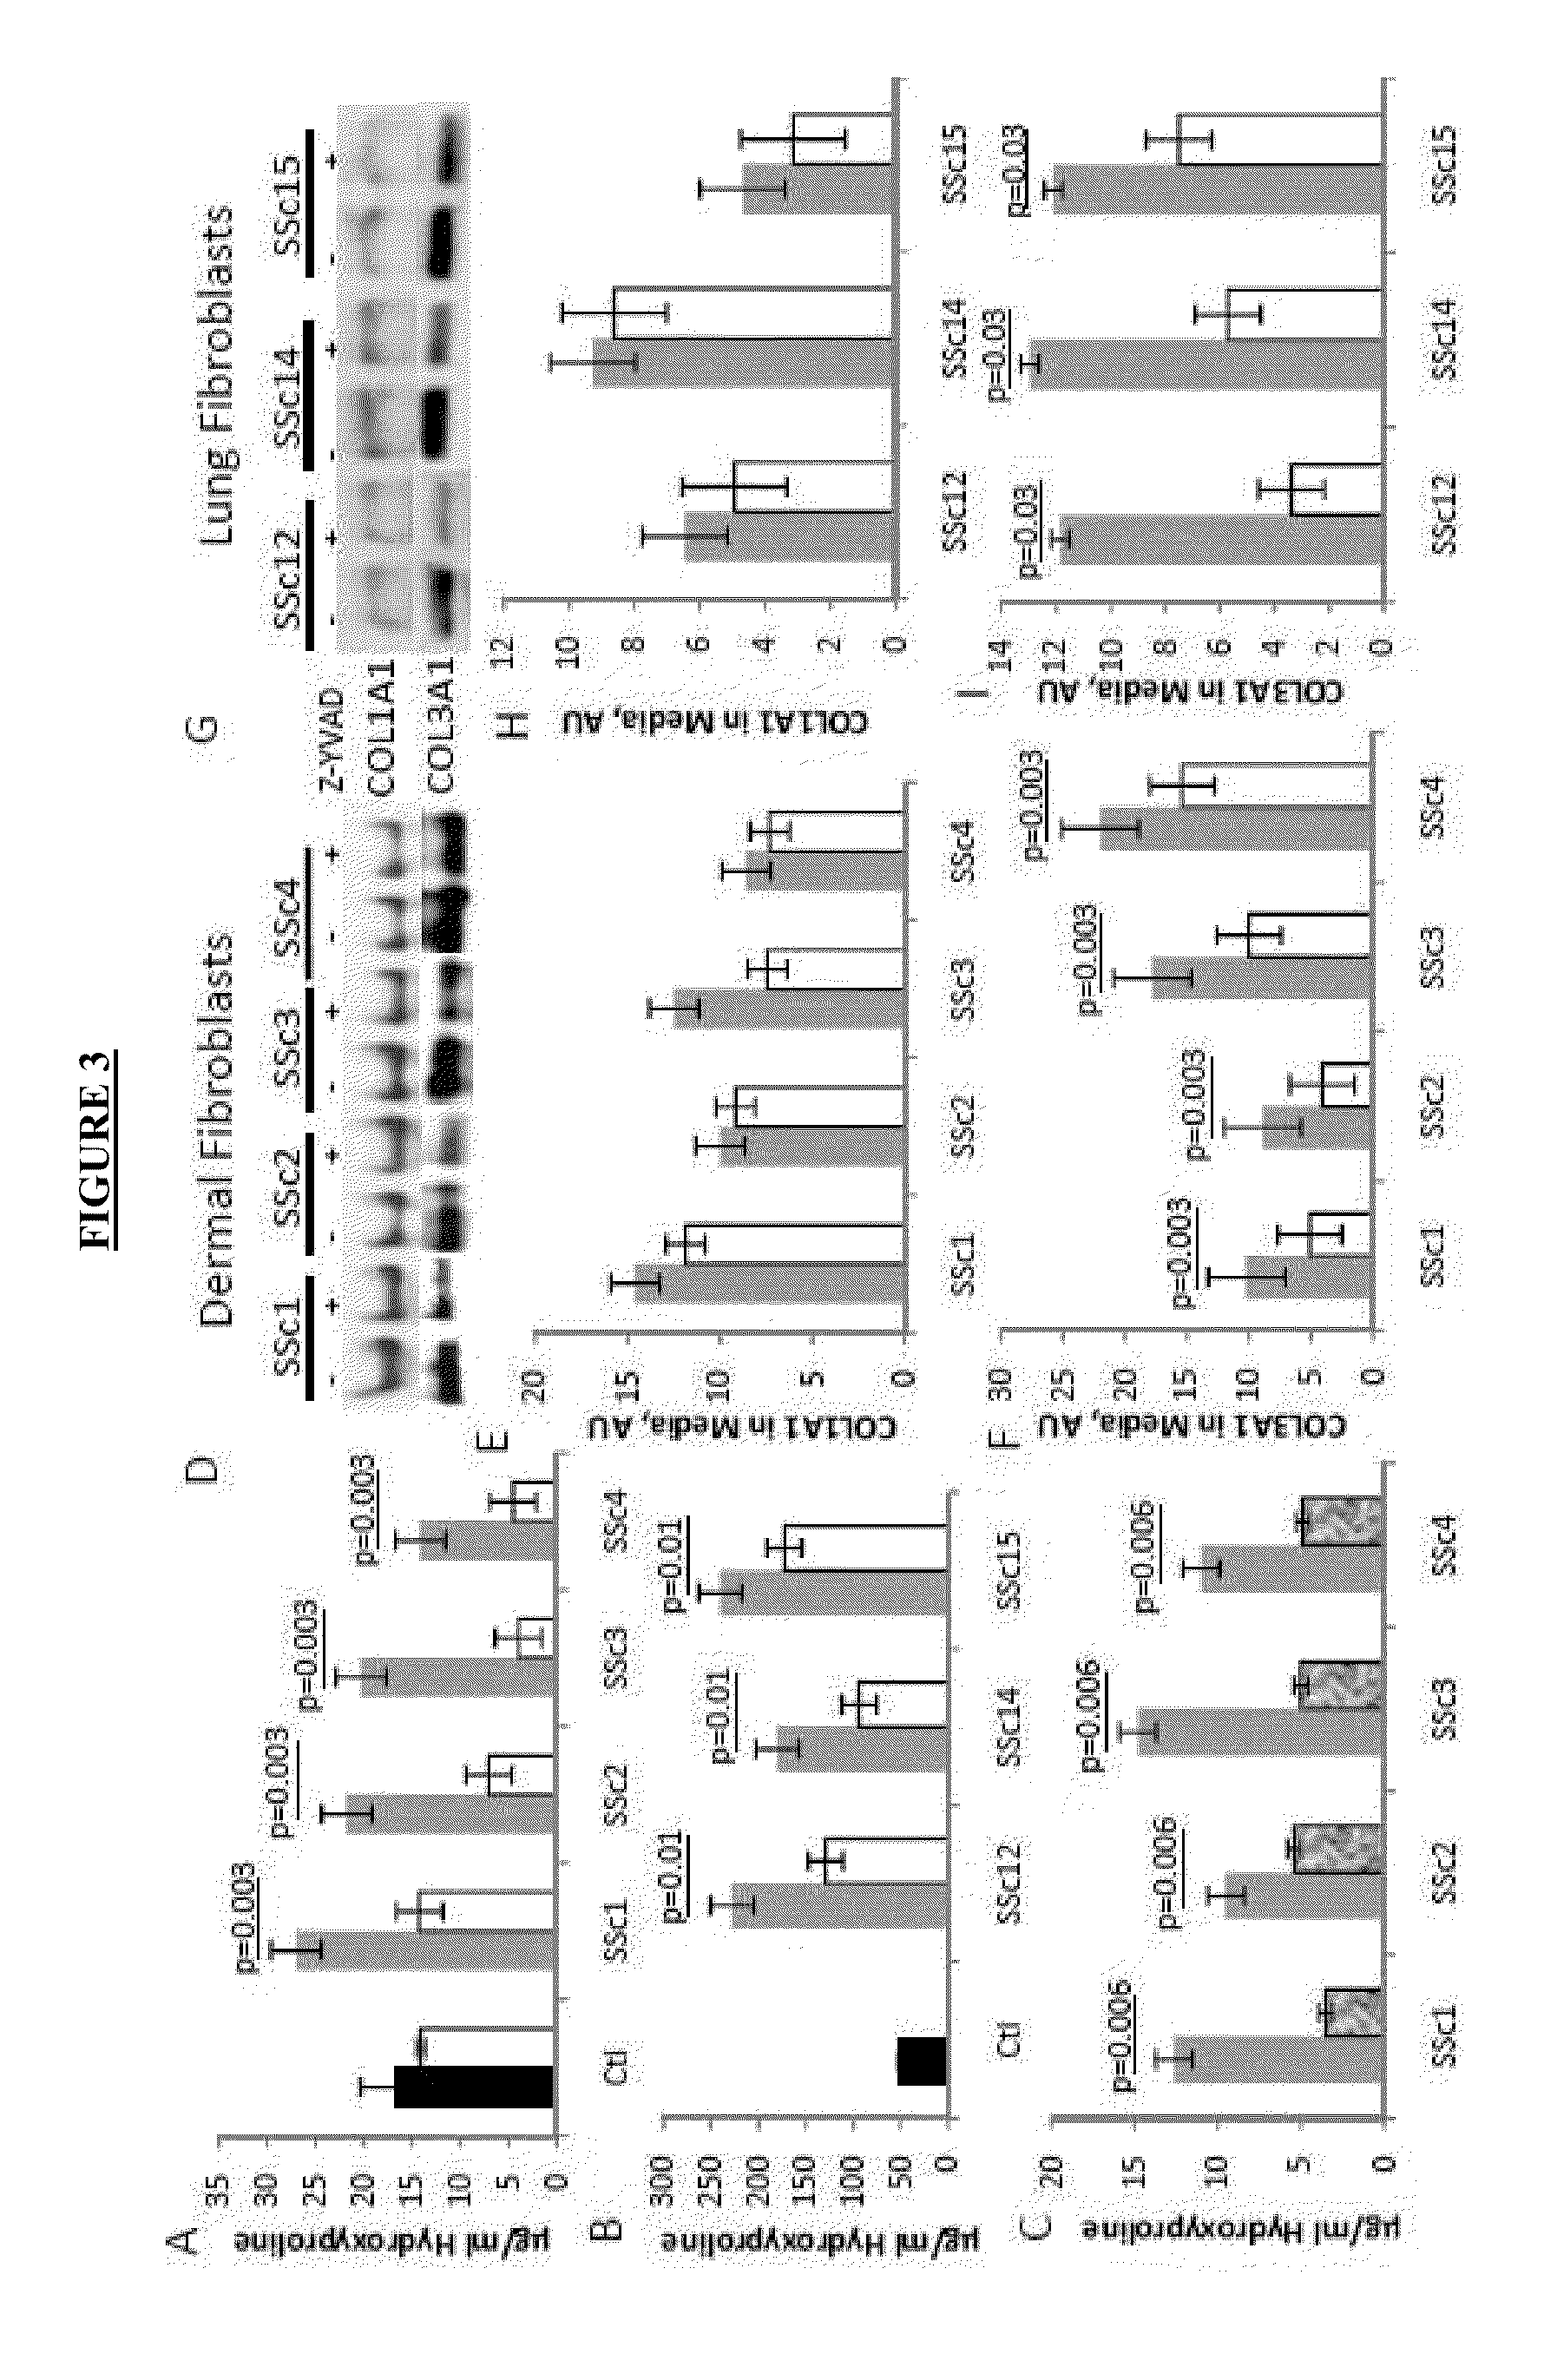 Methods for treating or preventing fibrosis in subjects afflicted with scleroderma